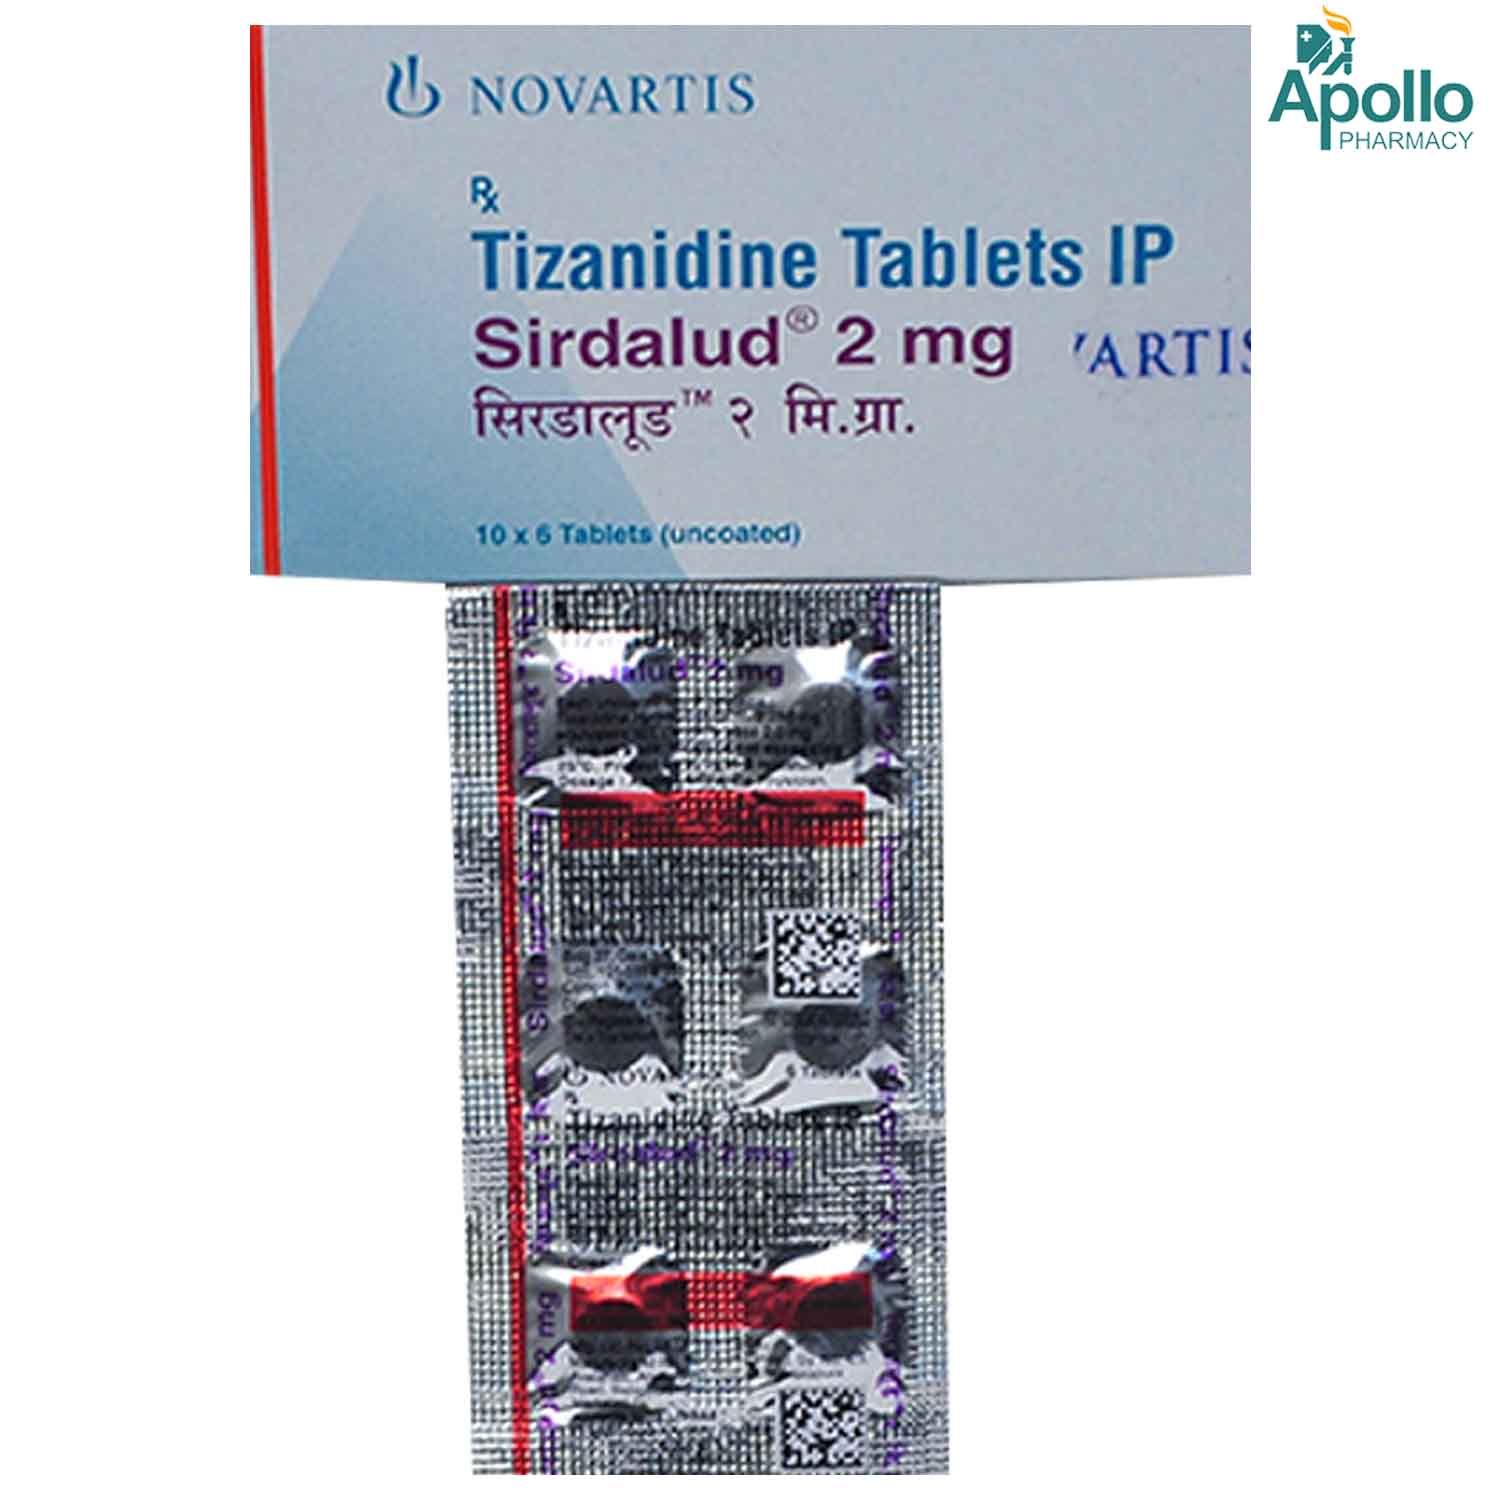 Buy SIRDALUD 2MG TABLET Online